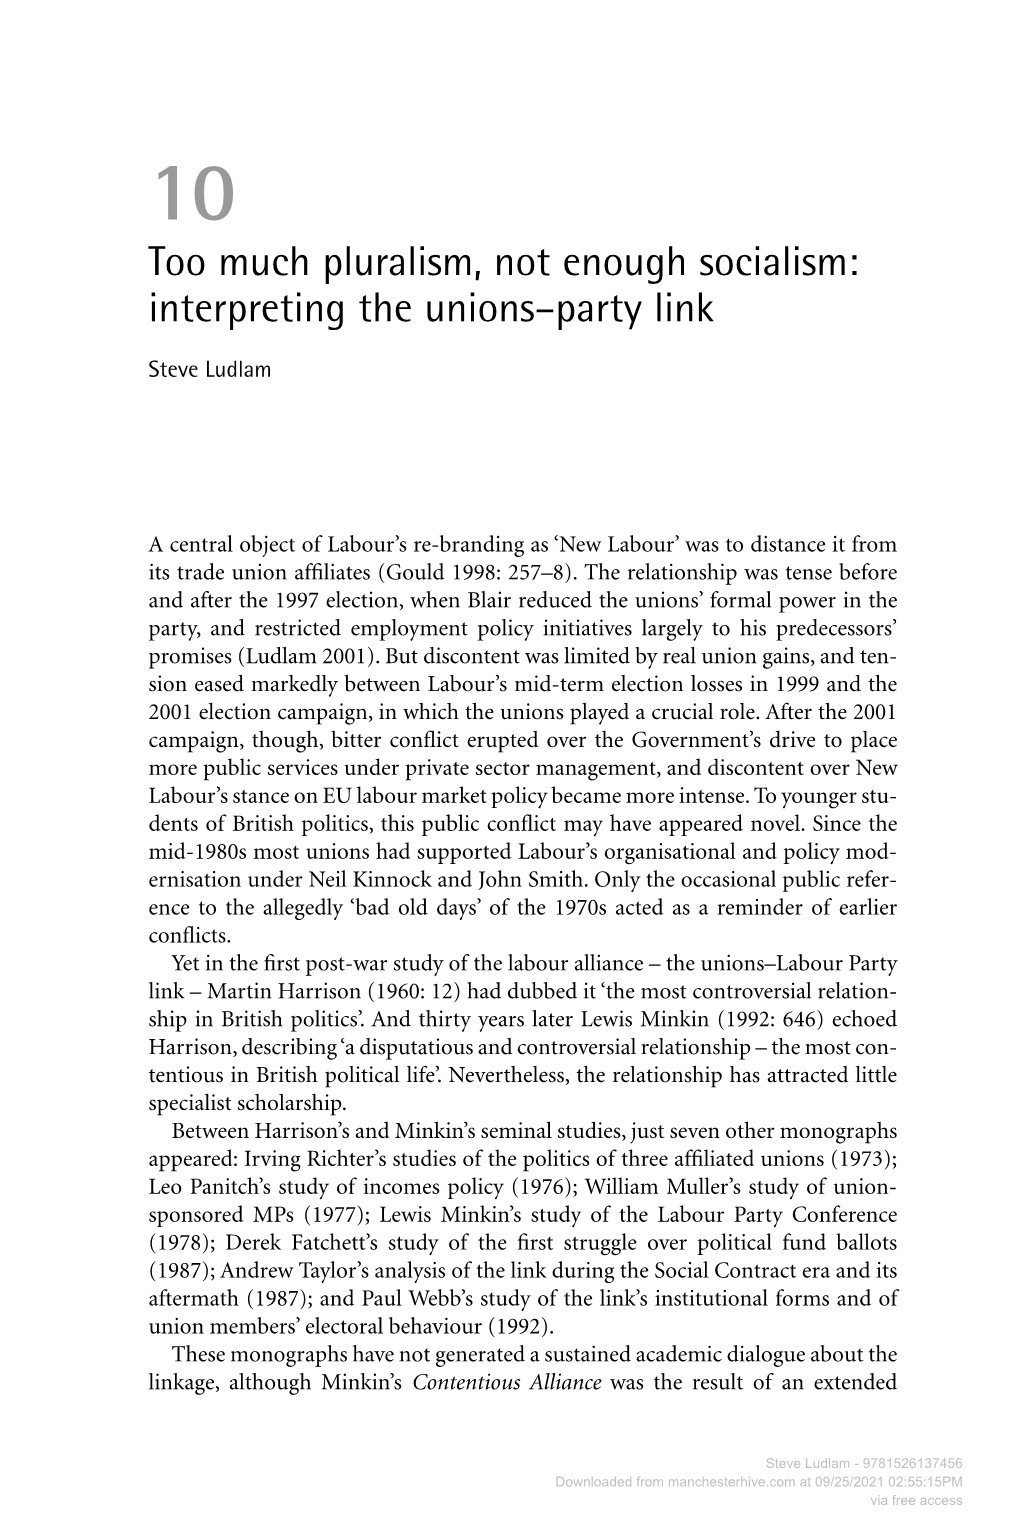 Too Much Pluralism, Not Enough Socialism: Interpreting the Unions–Party Link